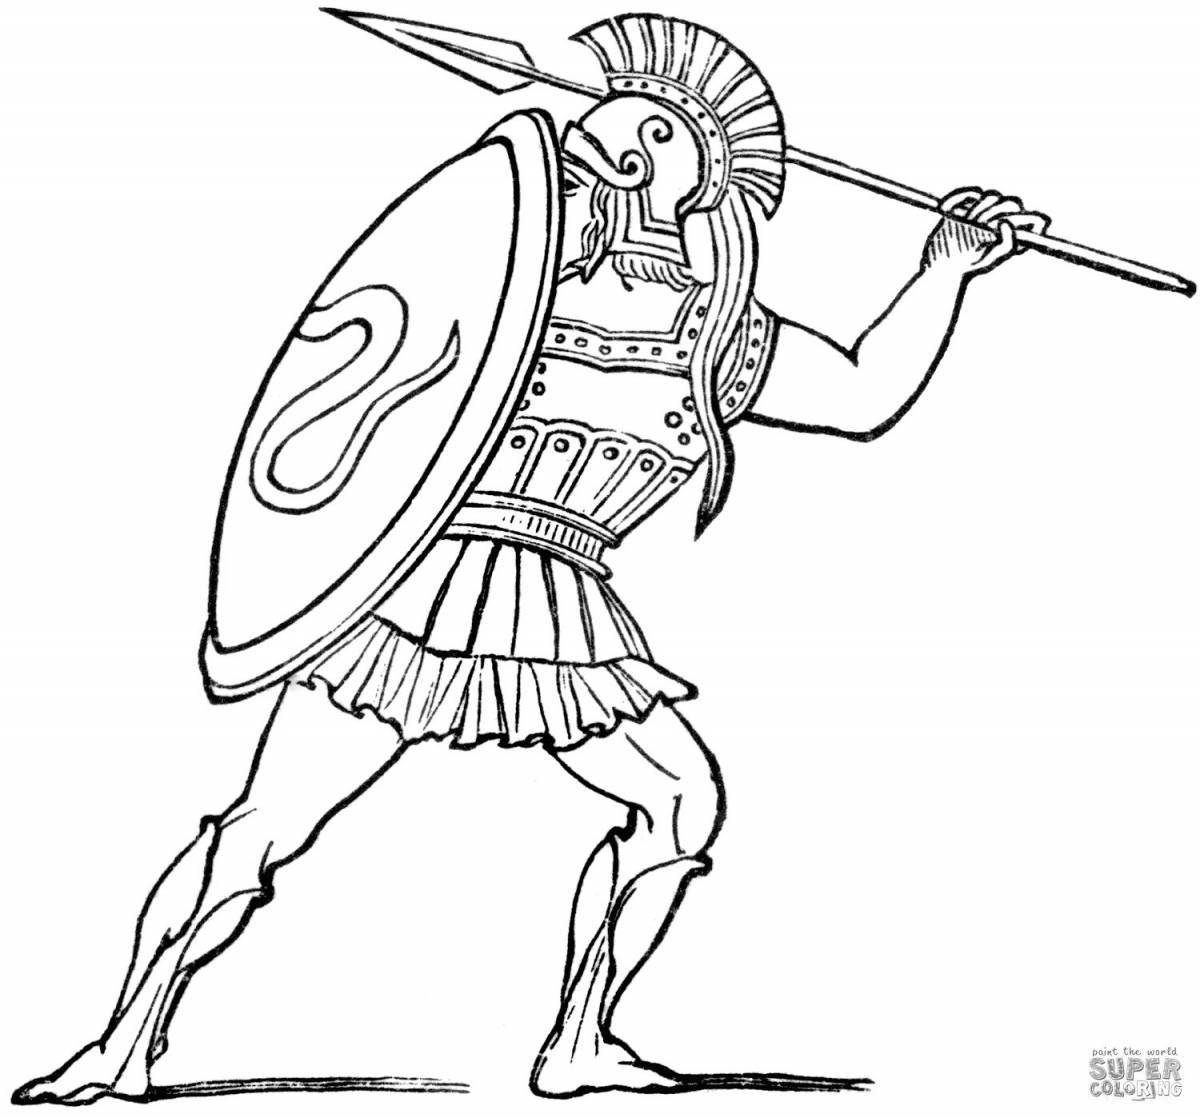 Majestic ancient greece coloring book